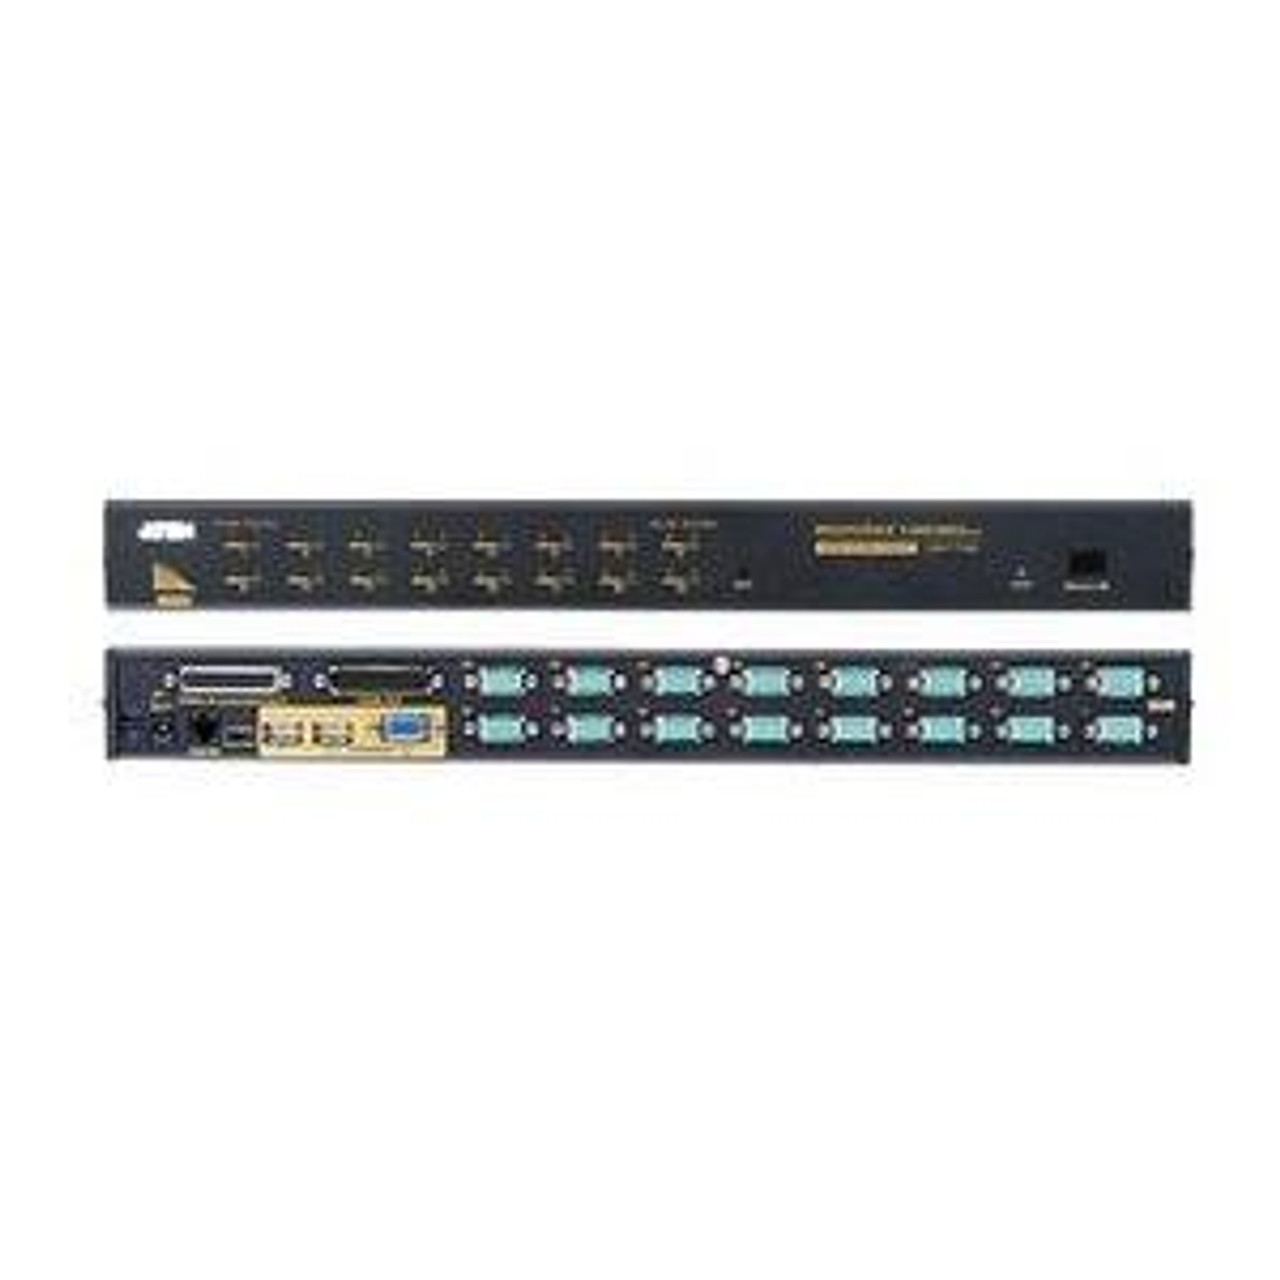 CS1716ADC ATEN Cs1716dc Is A High-efficiency Kvm Switch. It Provides The Most Efficient Solution To Fulfill The Management Needs Of Server Networks. Every